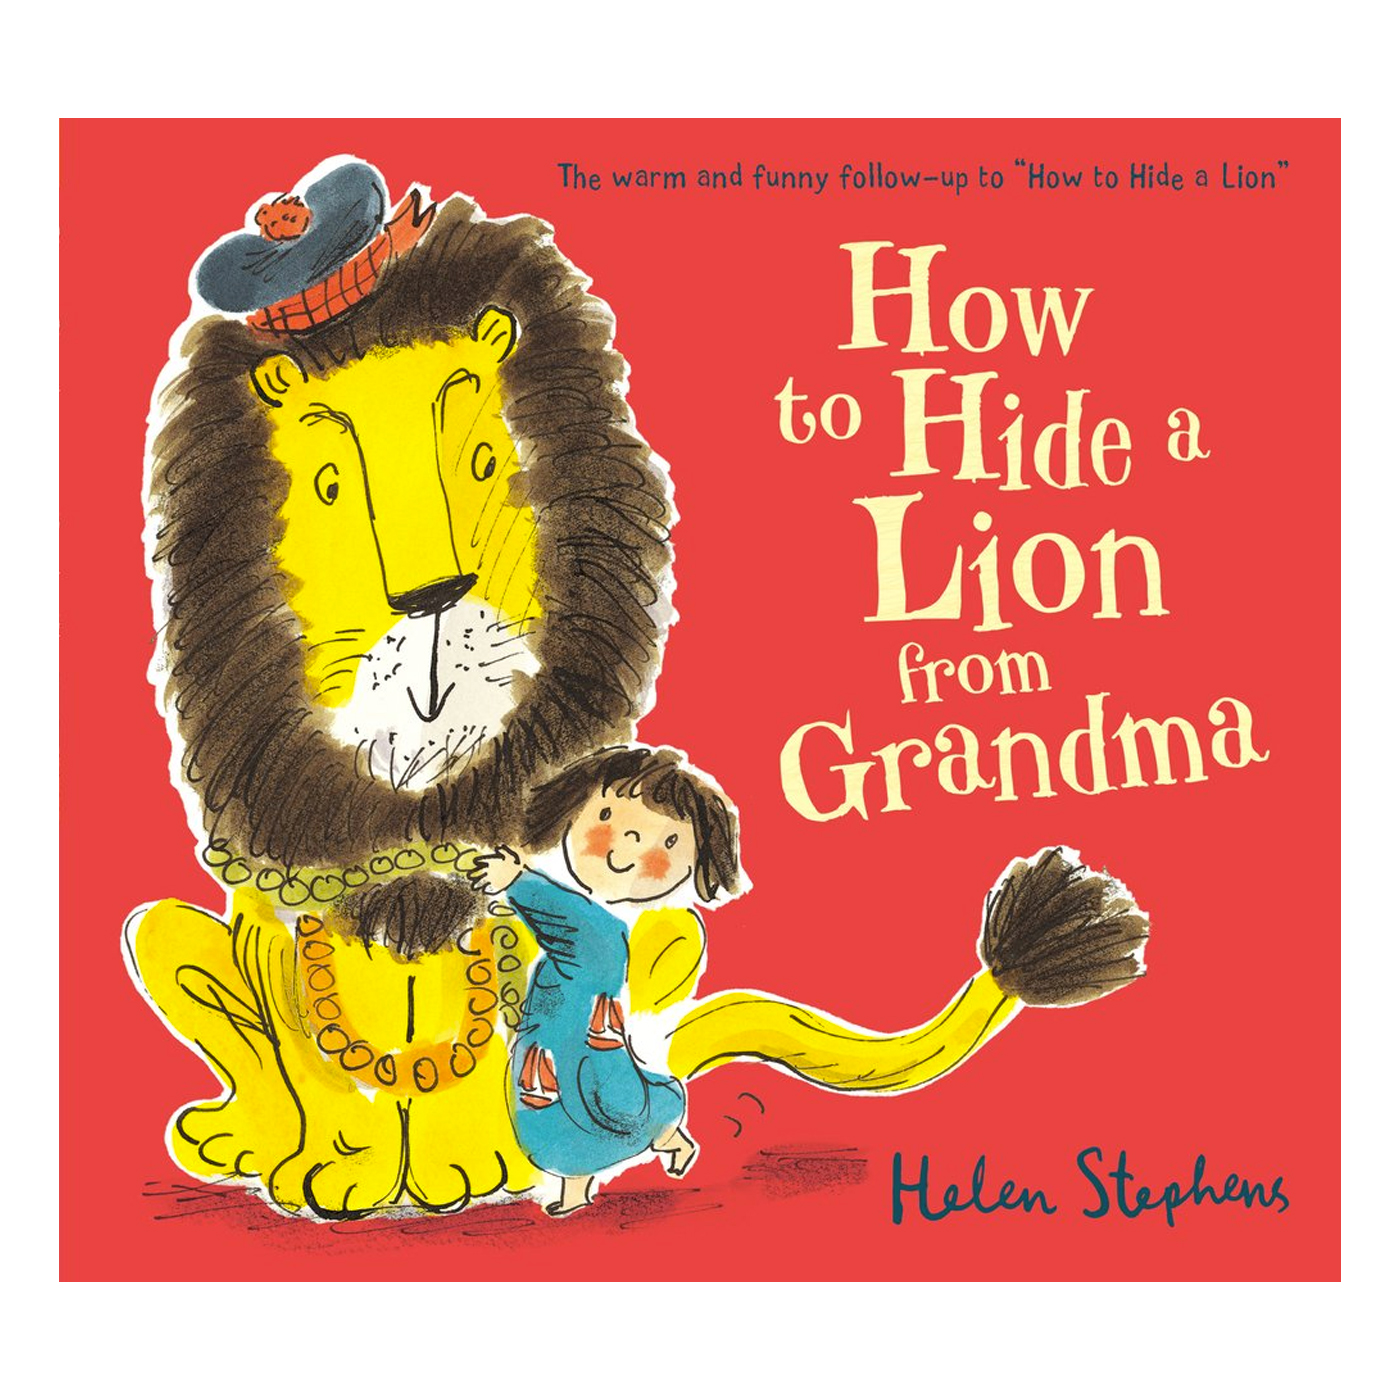  How to Hide a Lion from Grandma